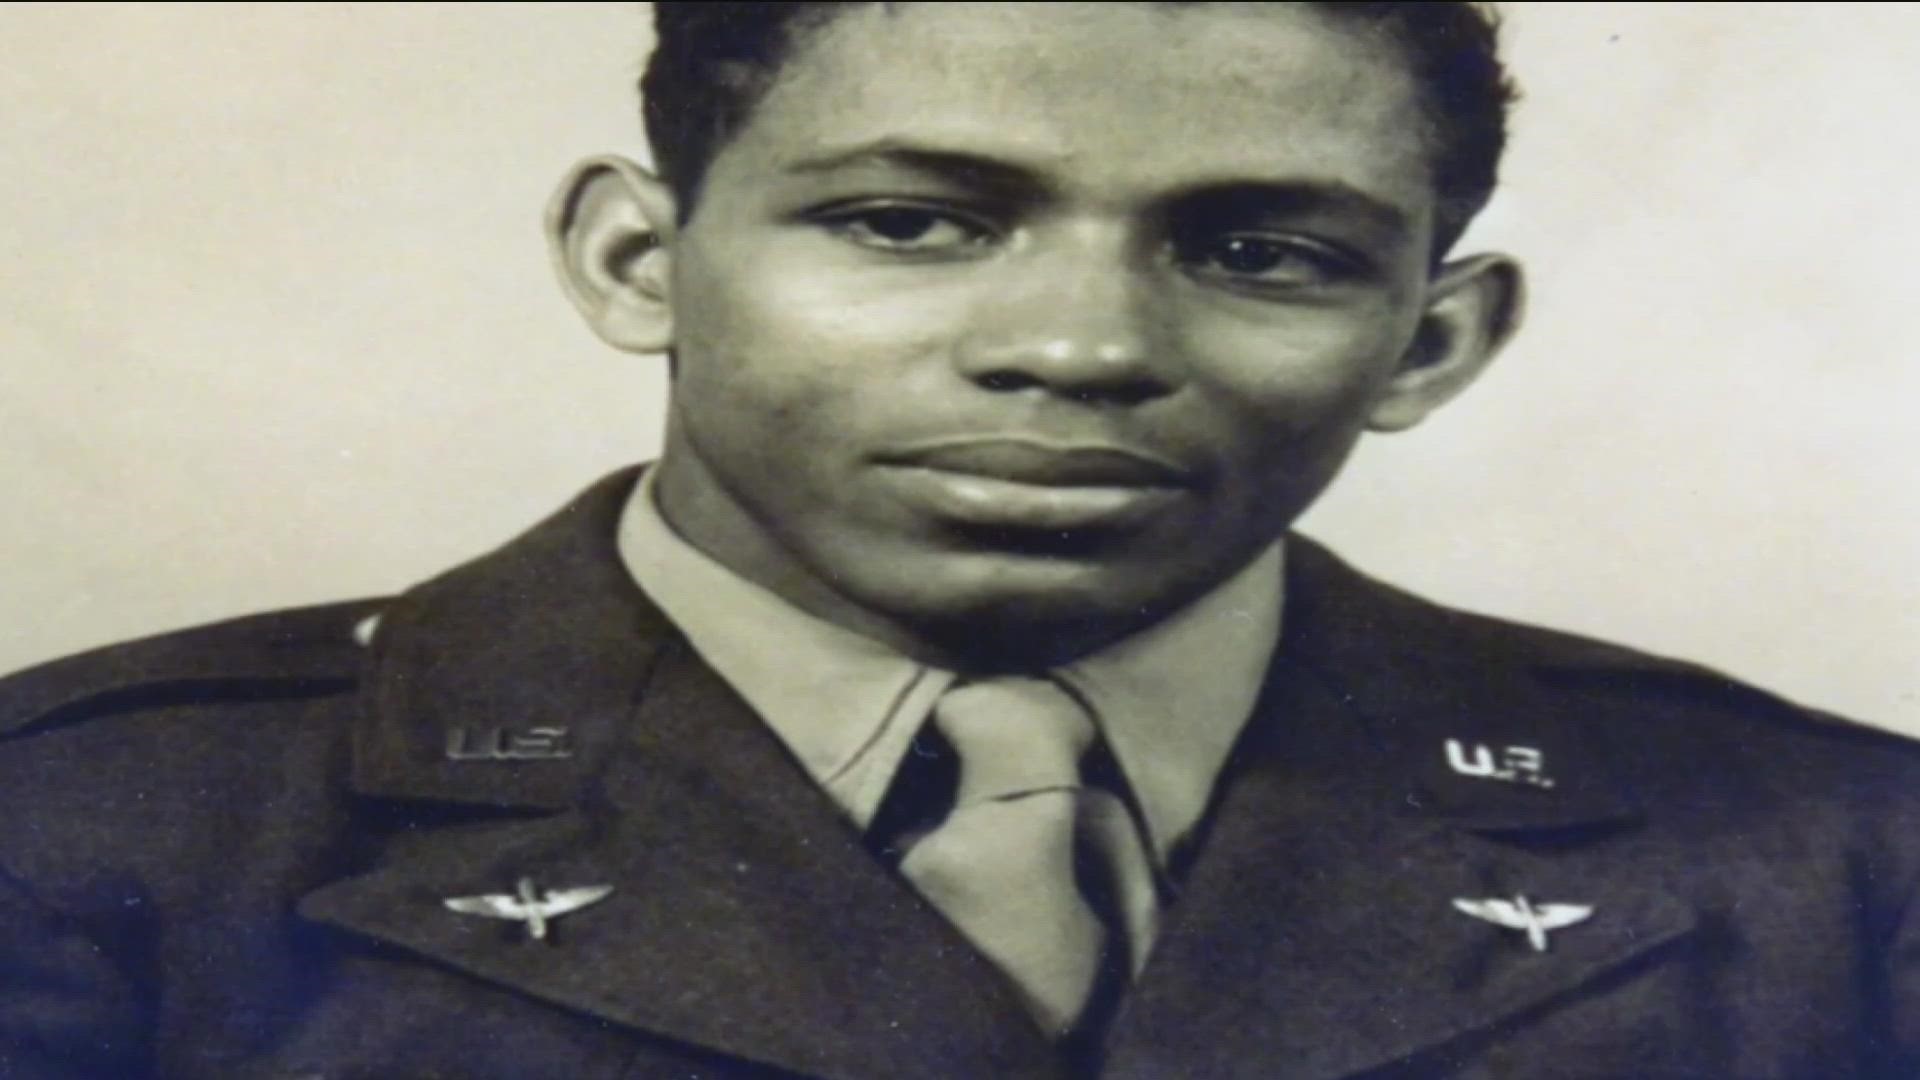 Dr. Harold Brown's passed away in 2022, but he will long be remembered for his role as one of the first African-American aviators in the U.S. armed forces.